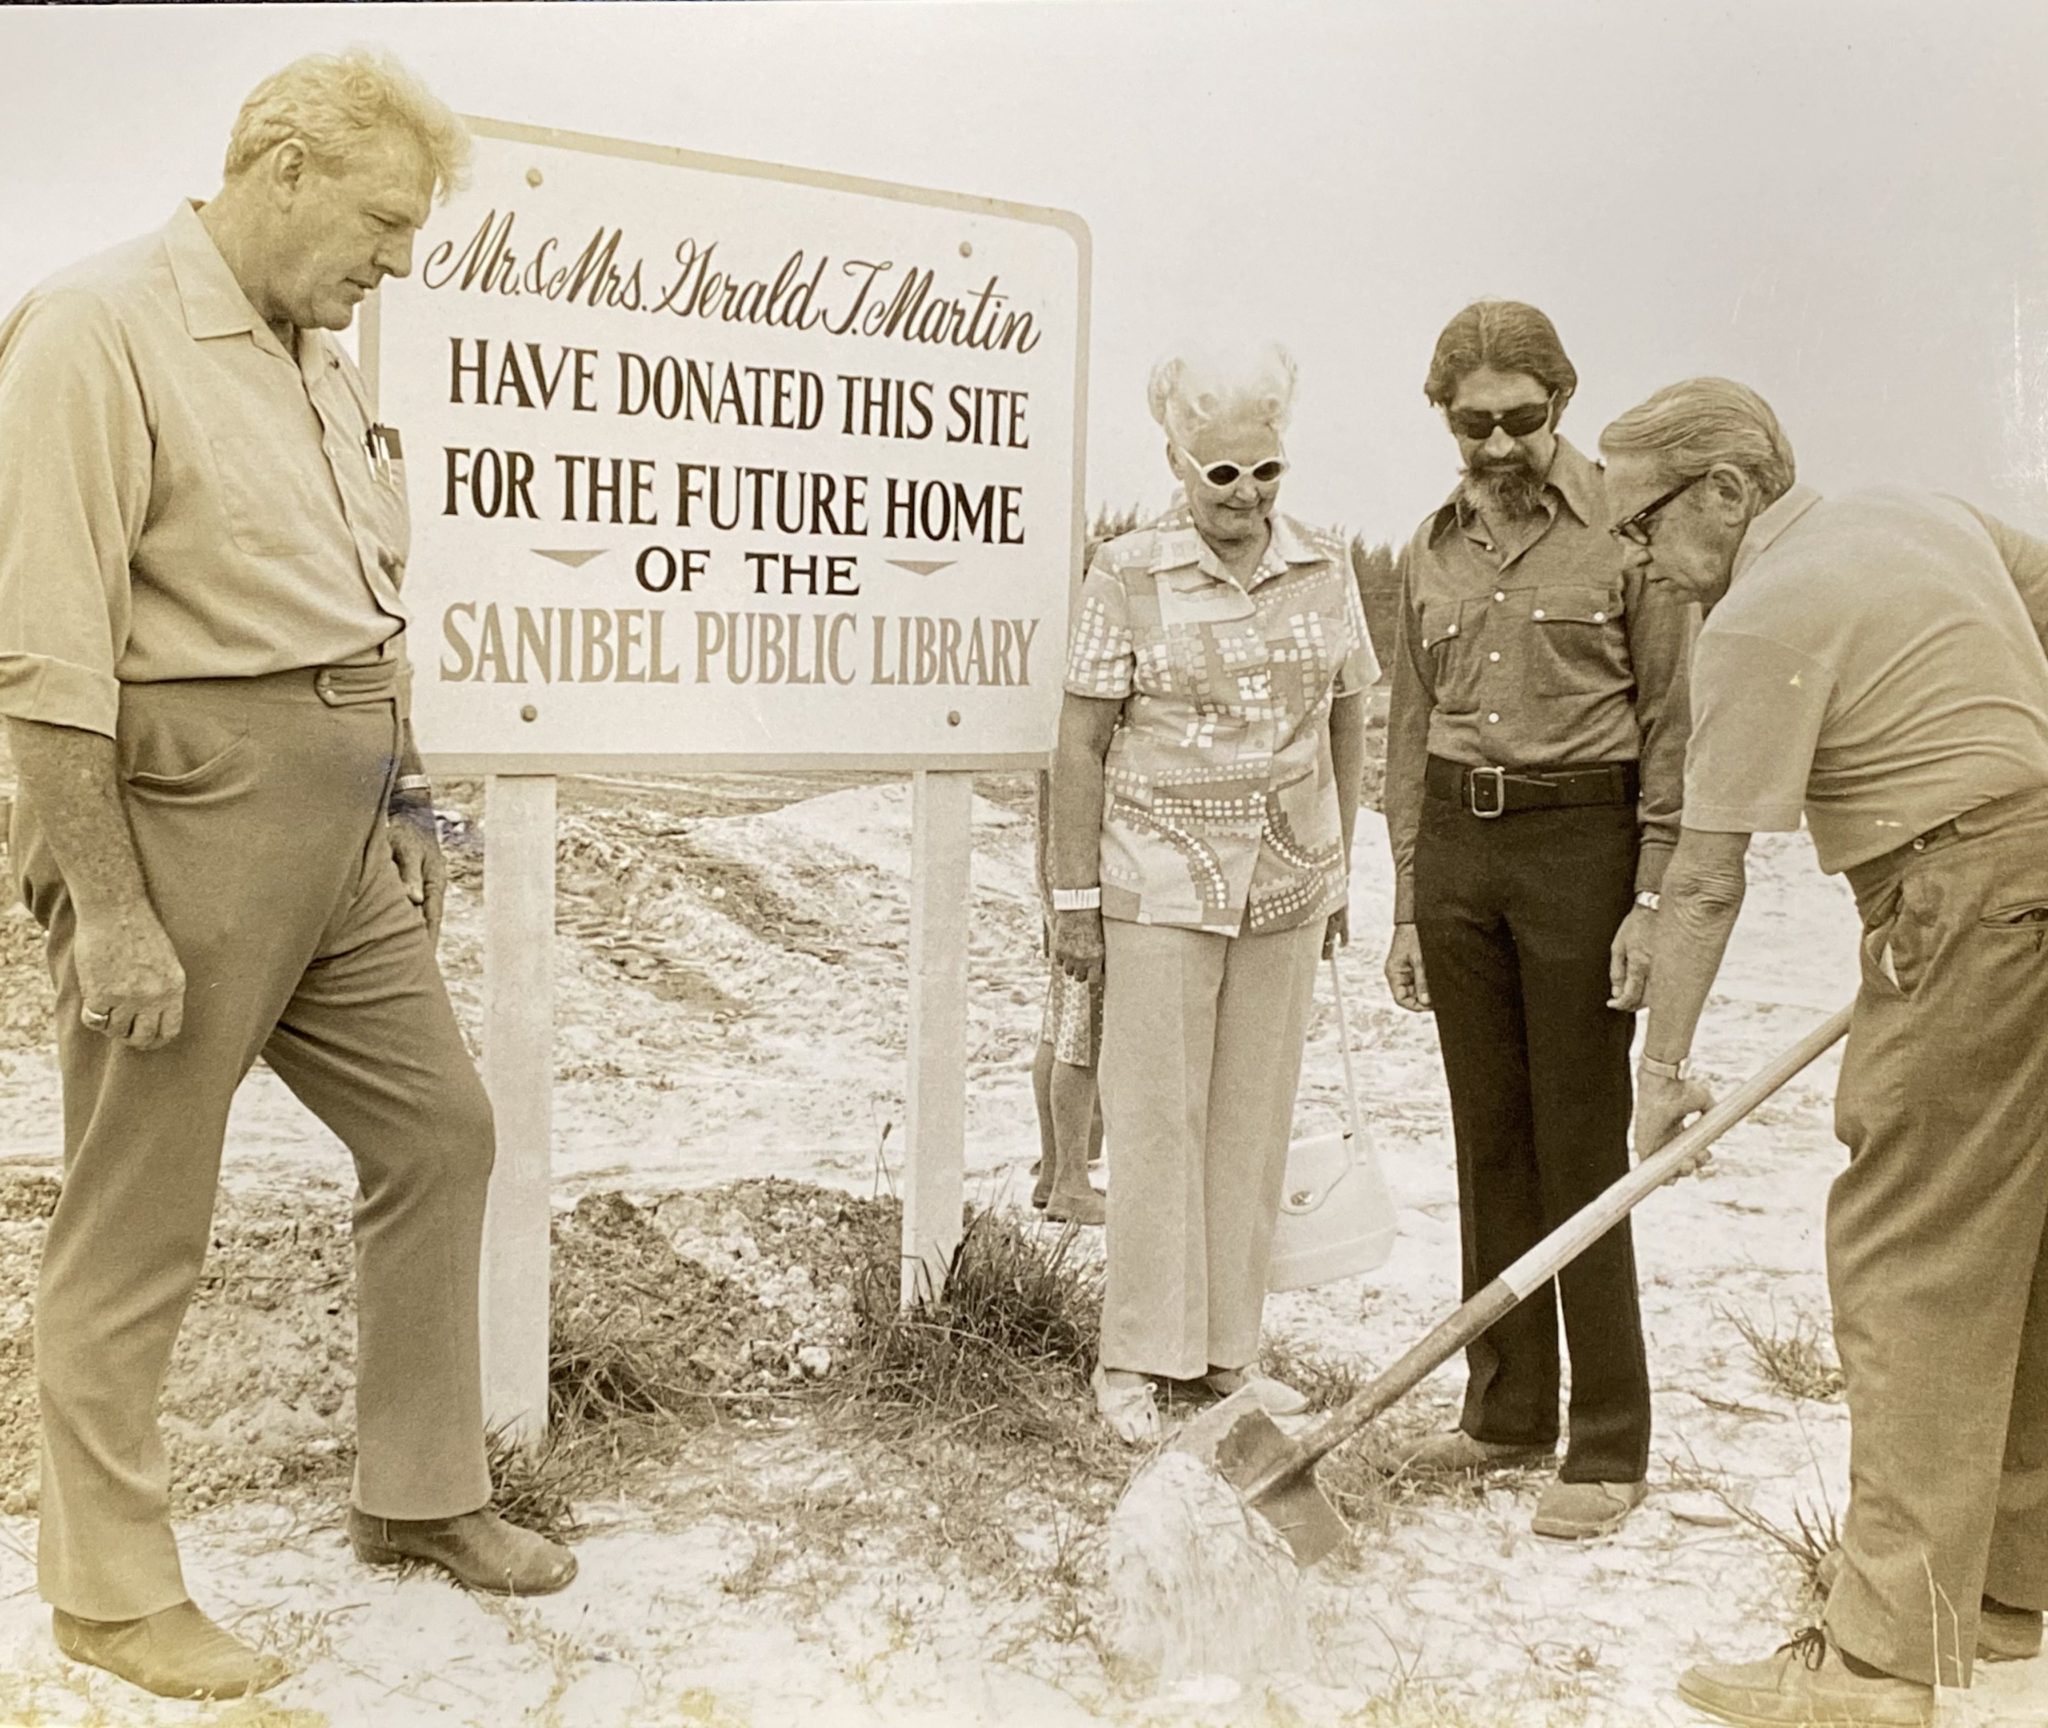 Librarian Mrs. Walter Emmons watches Library Board Pres. Robert Haynie wield shovel at dedication in 1973, with two men from Finder Construction.